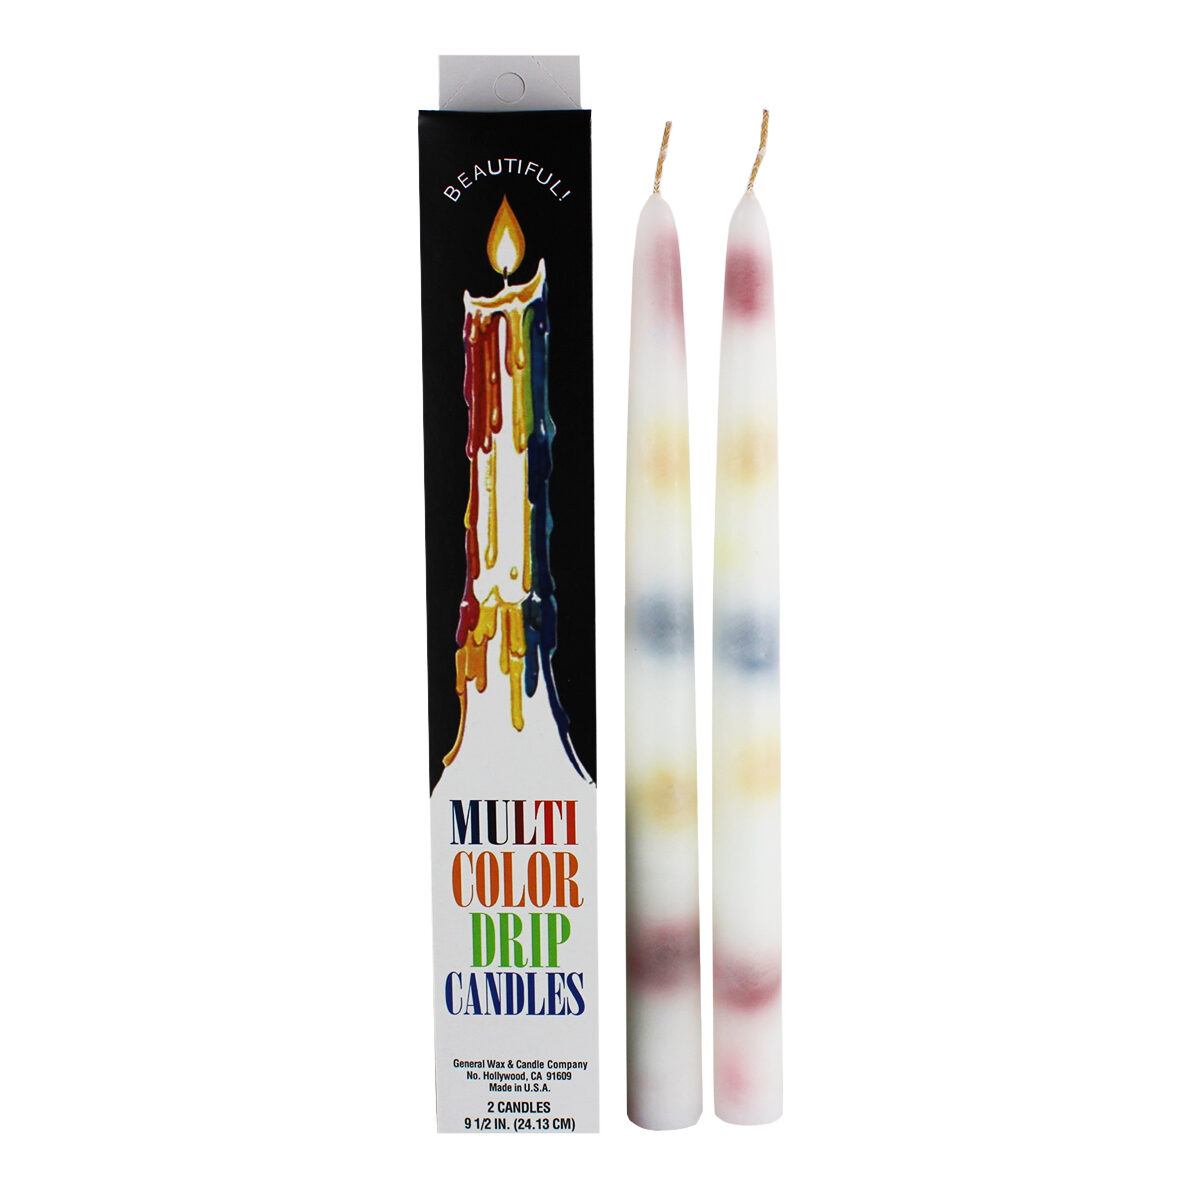 5 packs of 2 10 Multi-Color TAPER DRIP CANDLES 3/4" x 9 1/2" long 